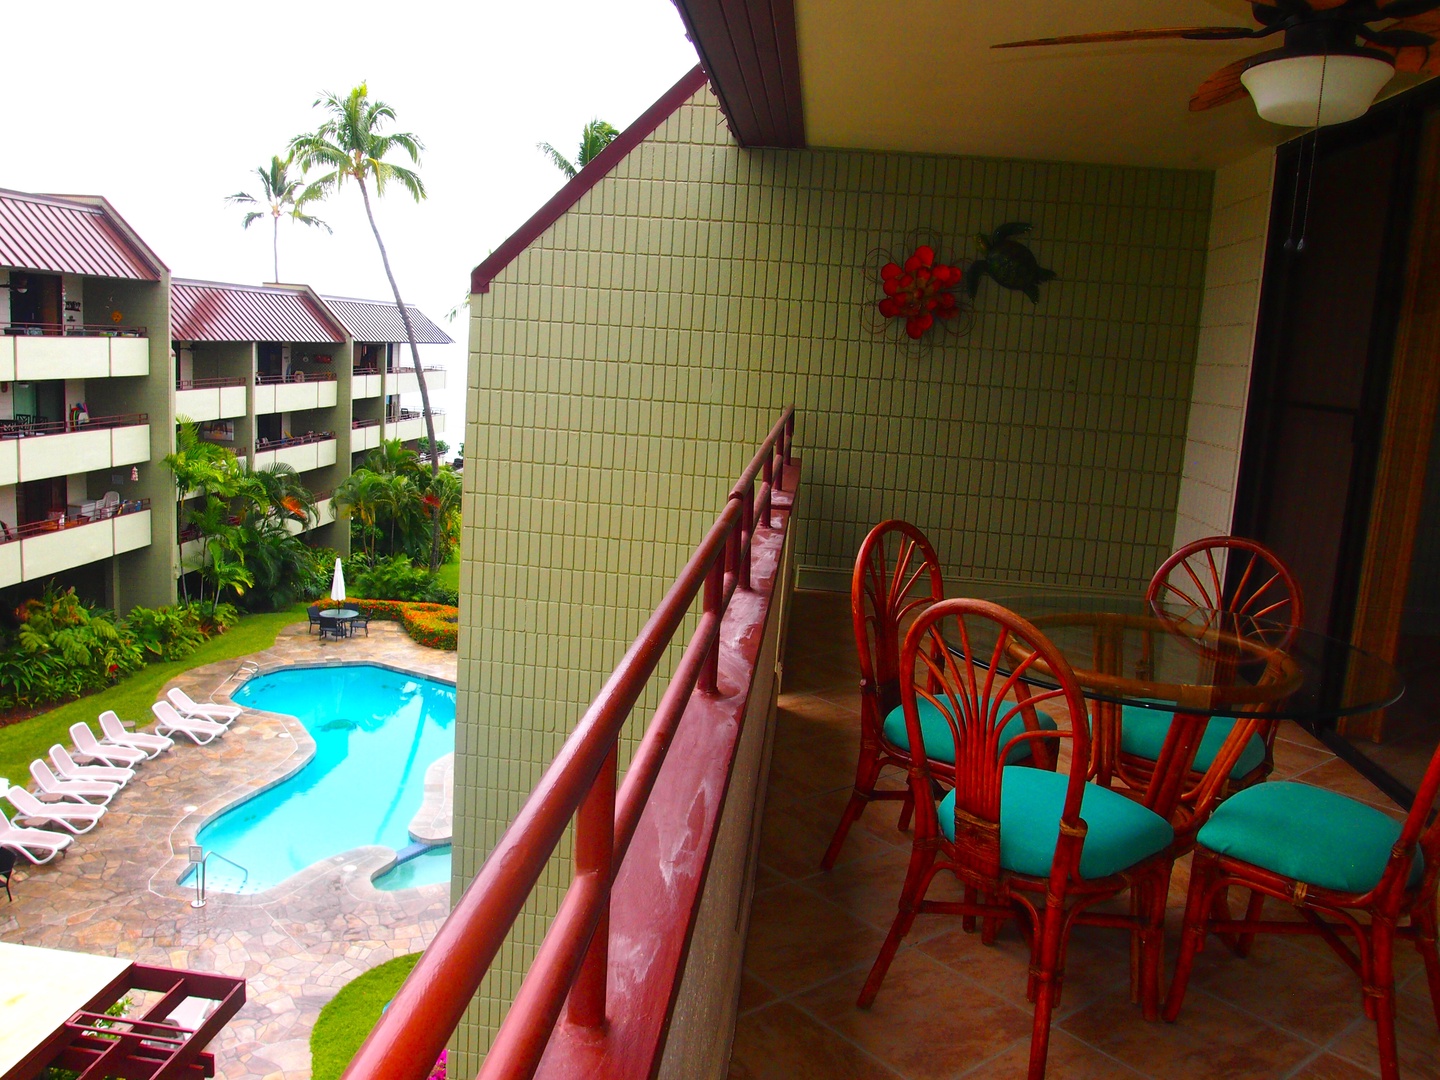 Lanai dining with view of pool